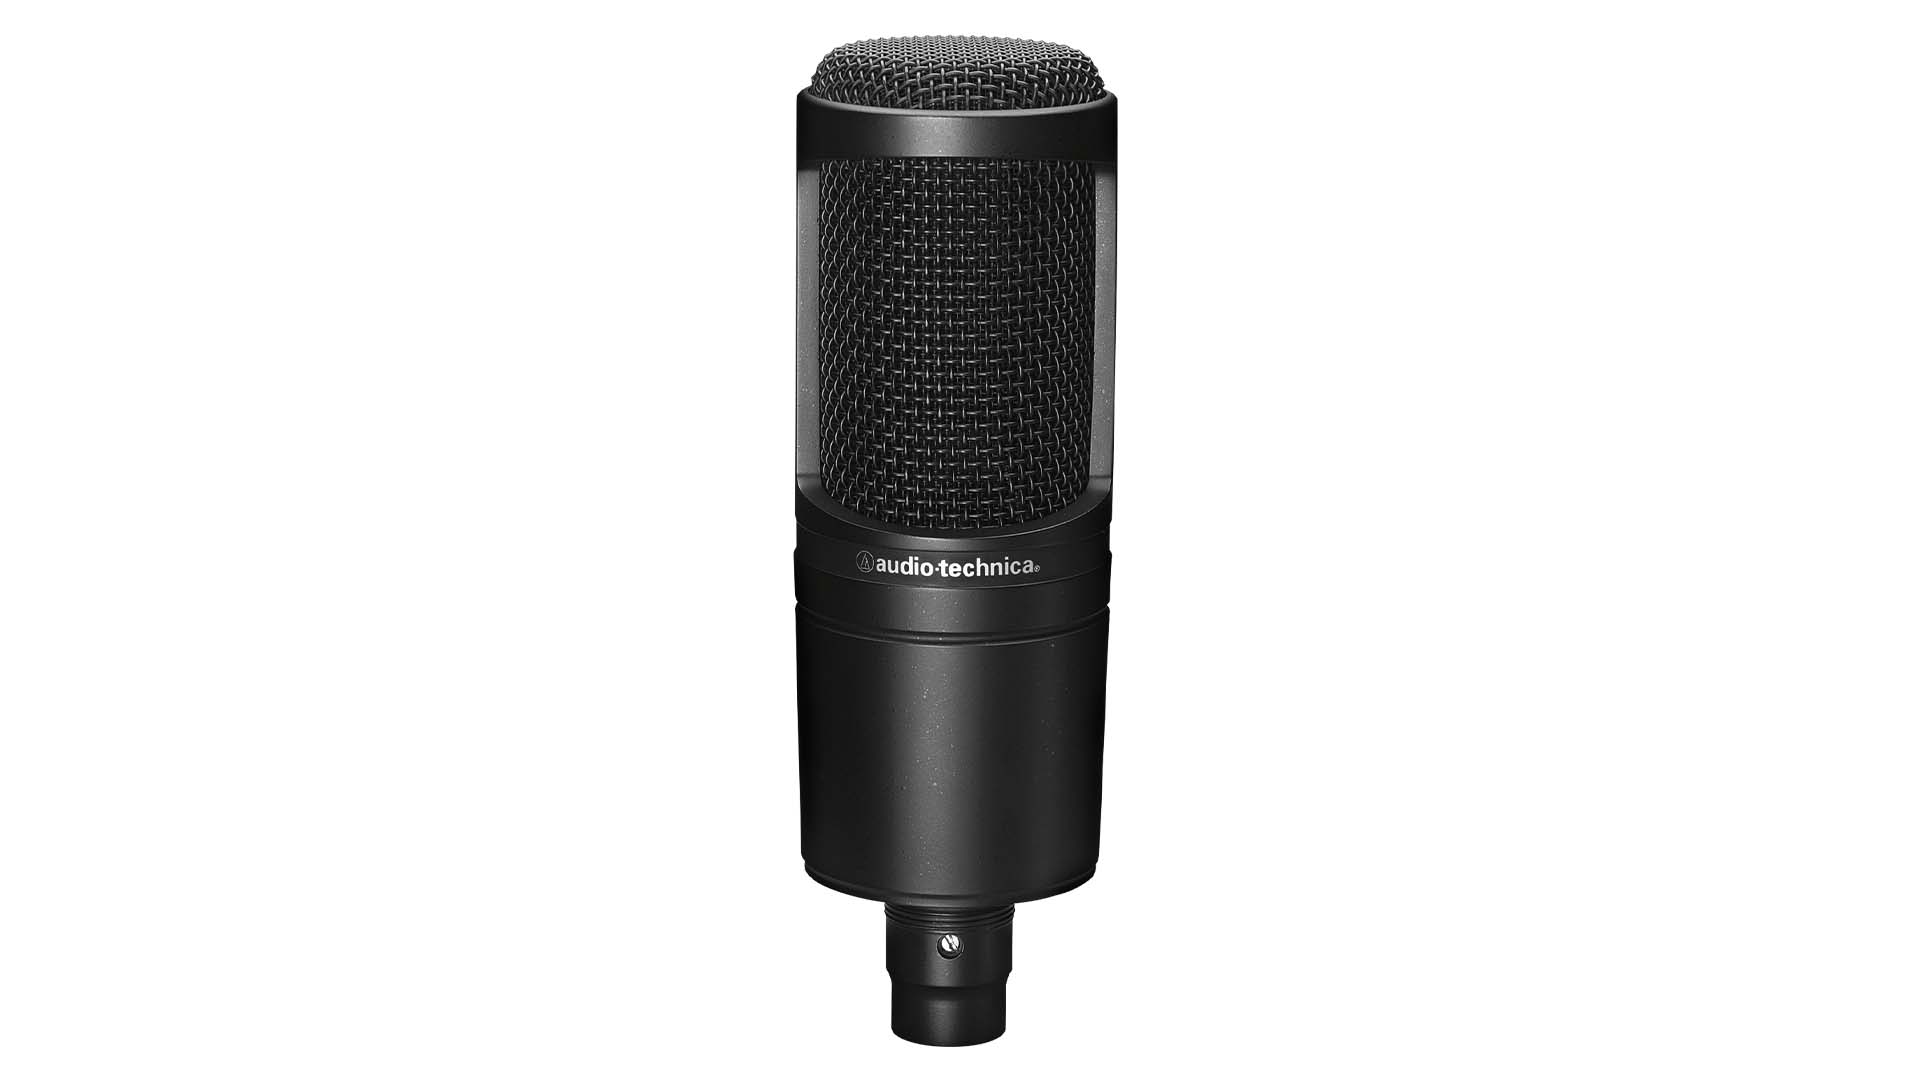 Audio Technica AT2020 best gaming microphone 2021